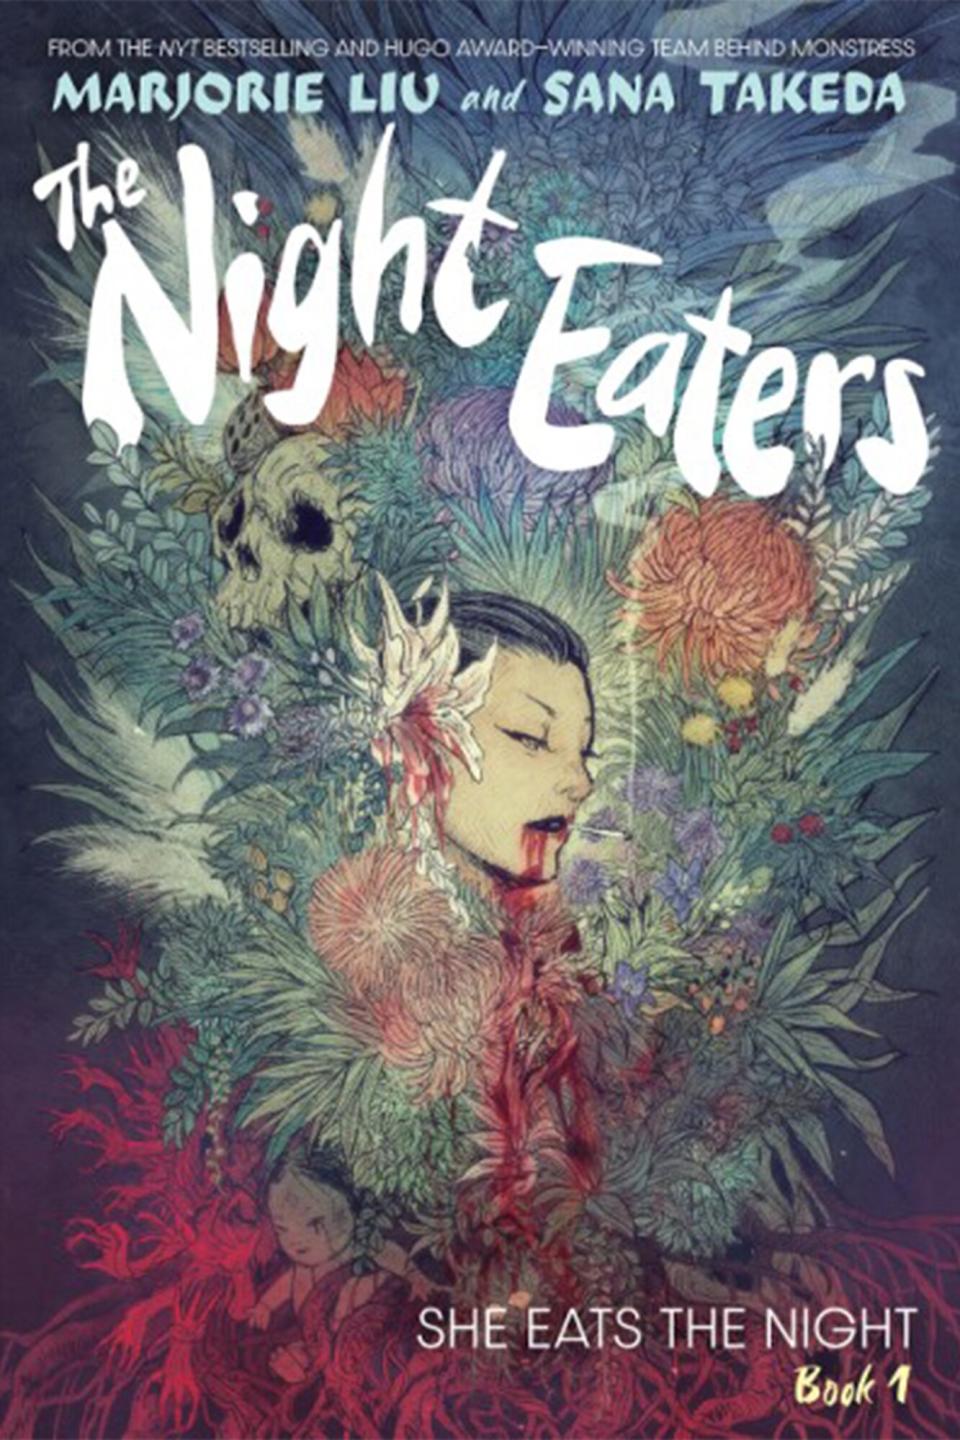 'She Eats the Night' The Night Eaters